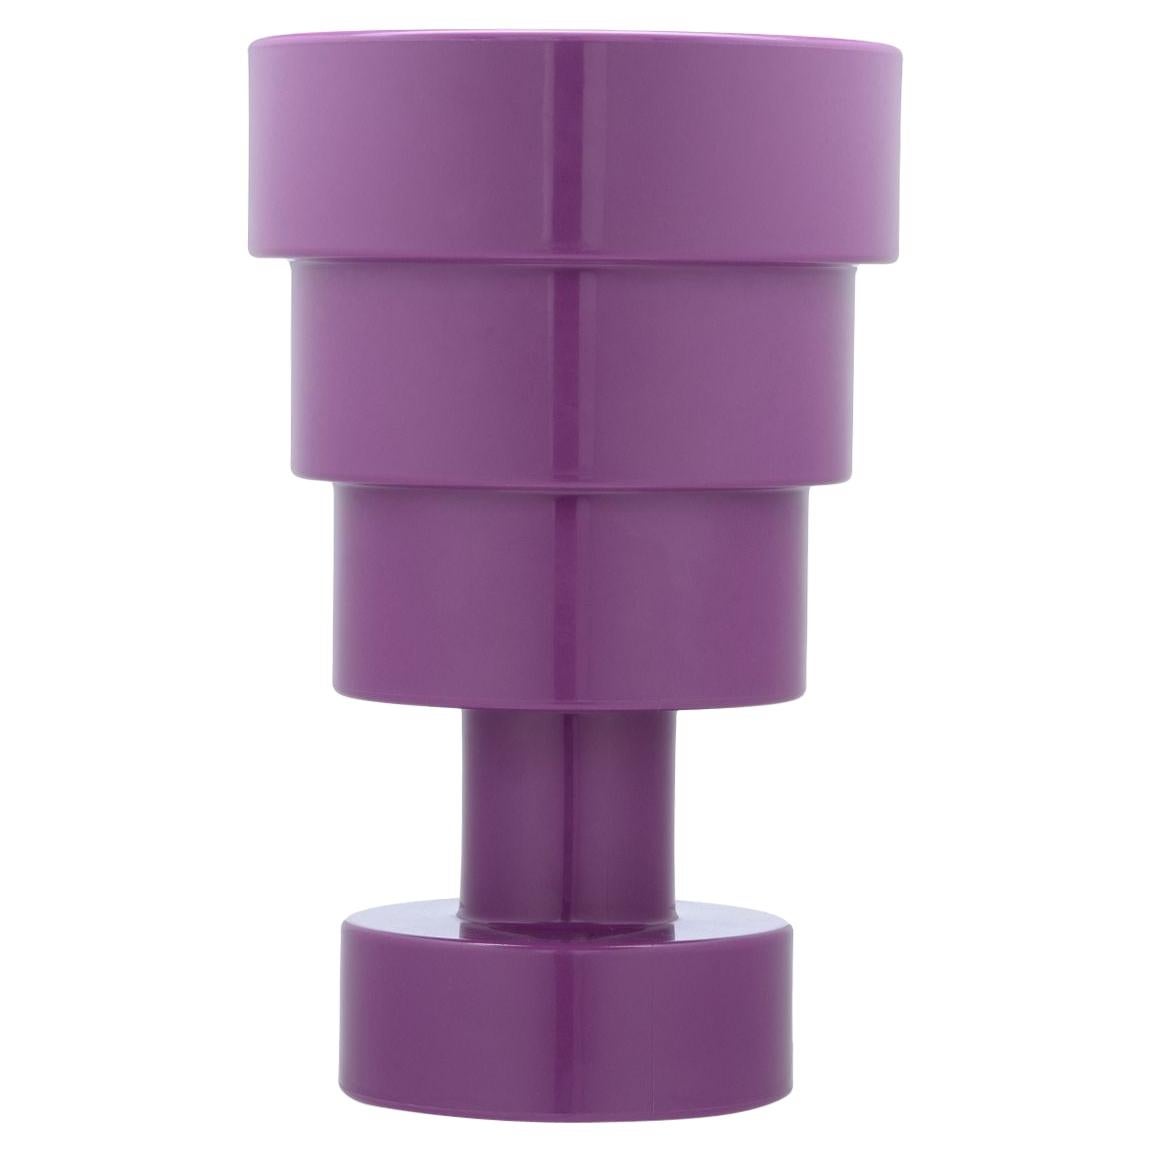 Kartell Calice Stool in Violet by Ettore Sottsass For Sale